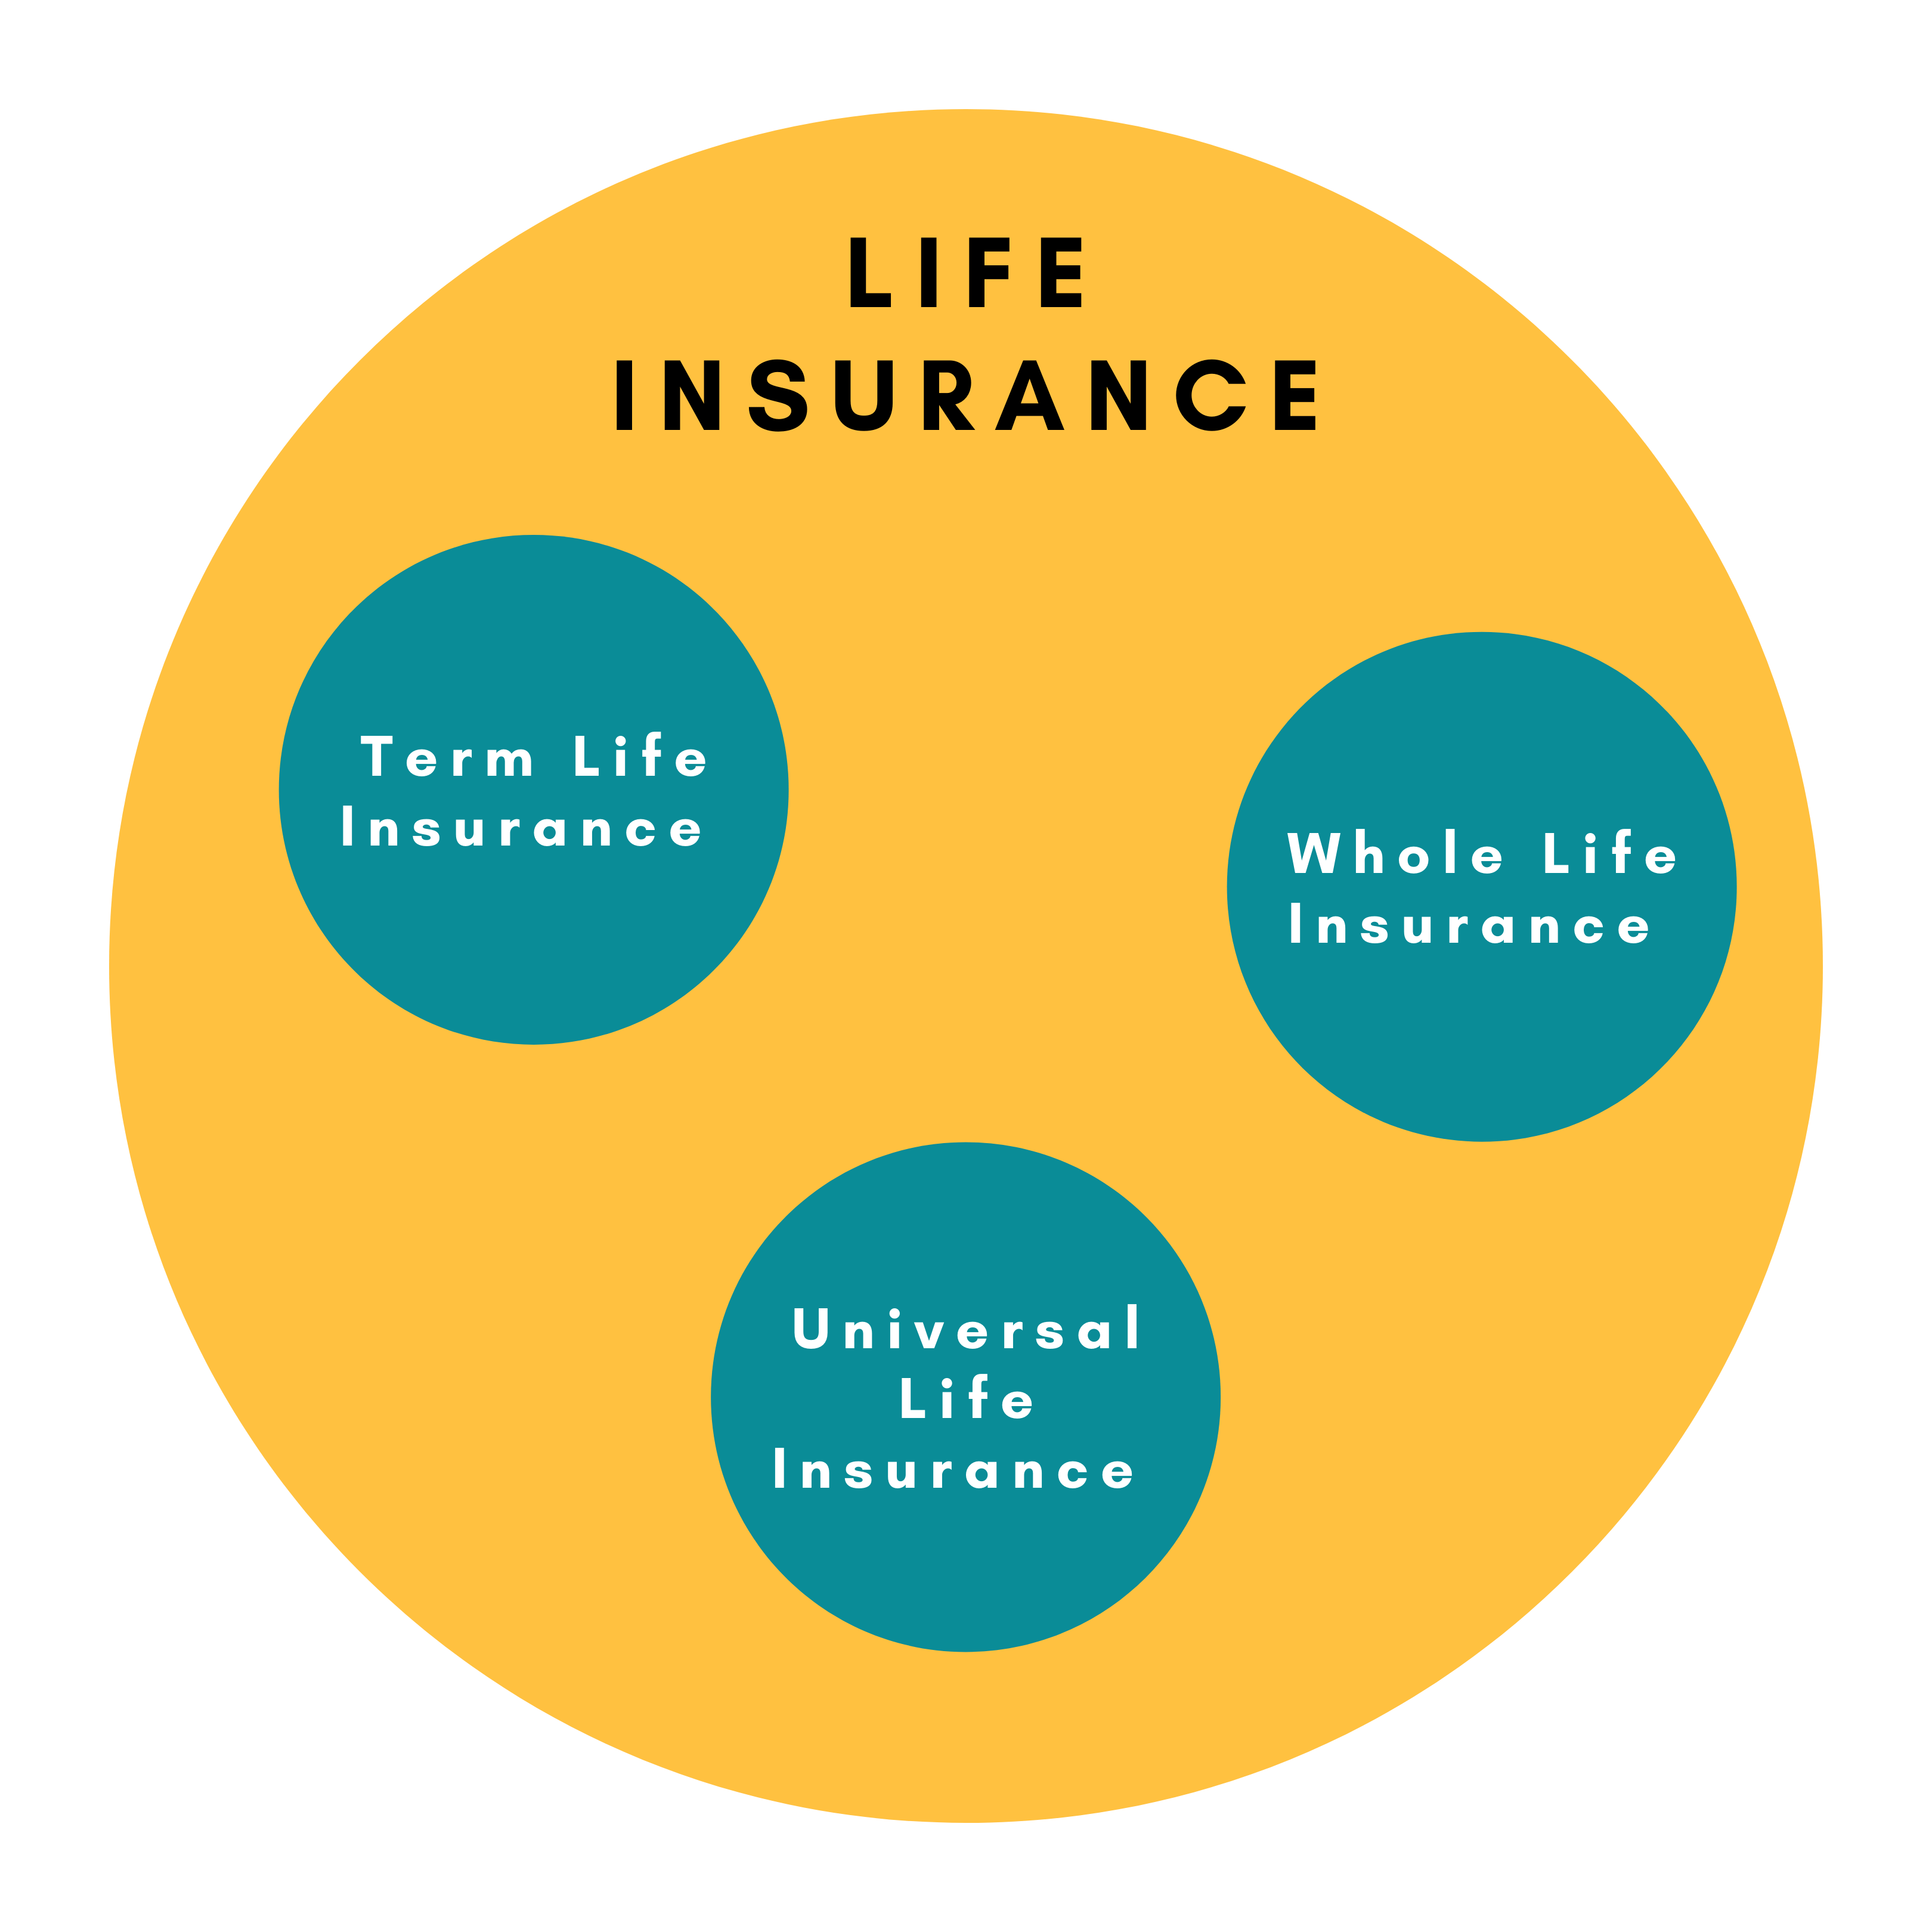 Types & Benefits of Life Insurance Policy in UAE